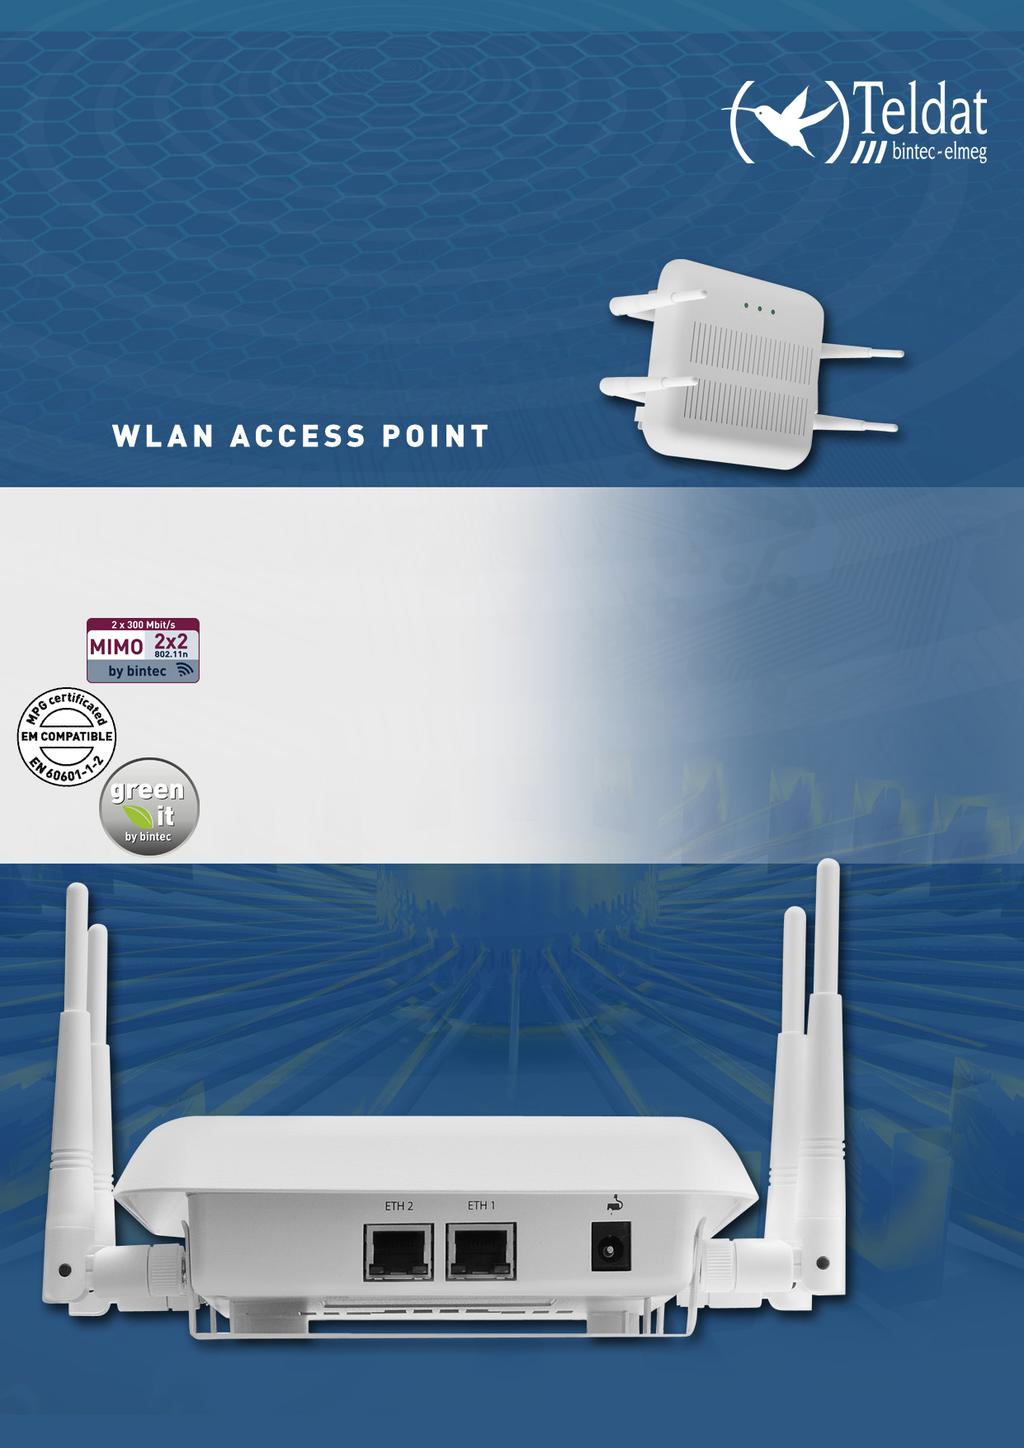 Business WLAN Access Point Dual concurrent radio for simulanteuos 2.4/5 GHZ operation 802.